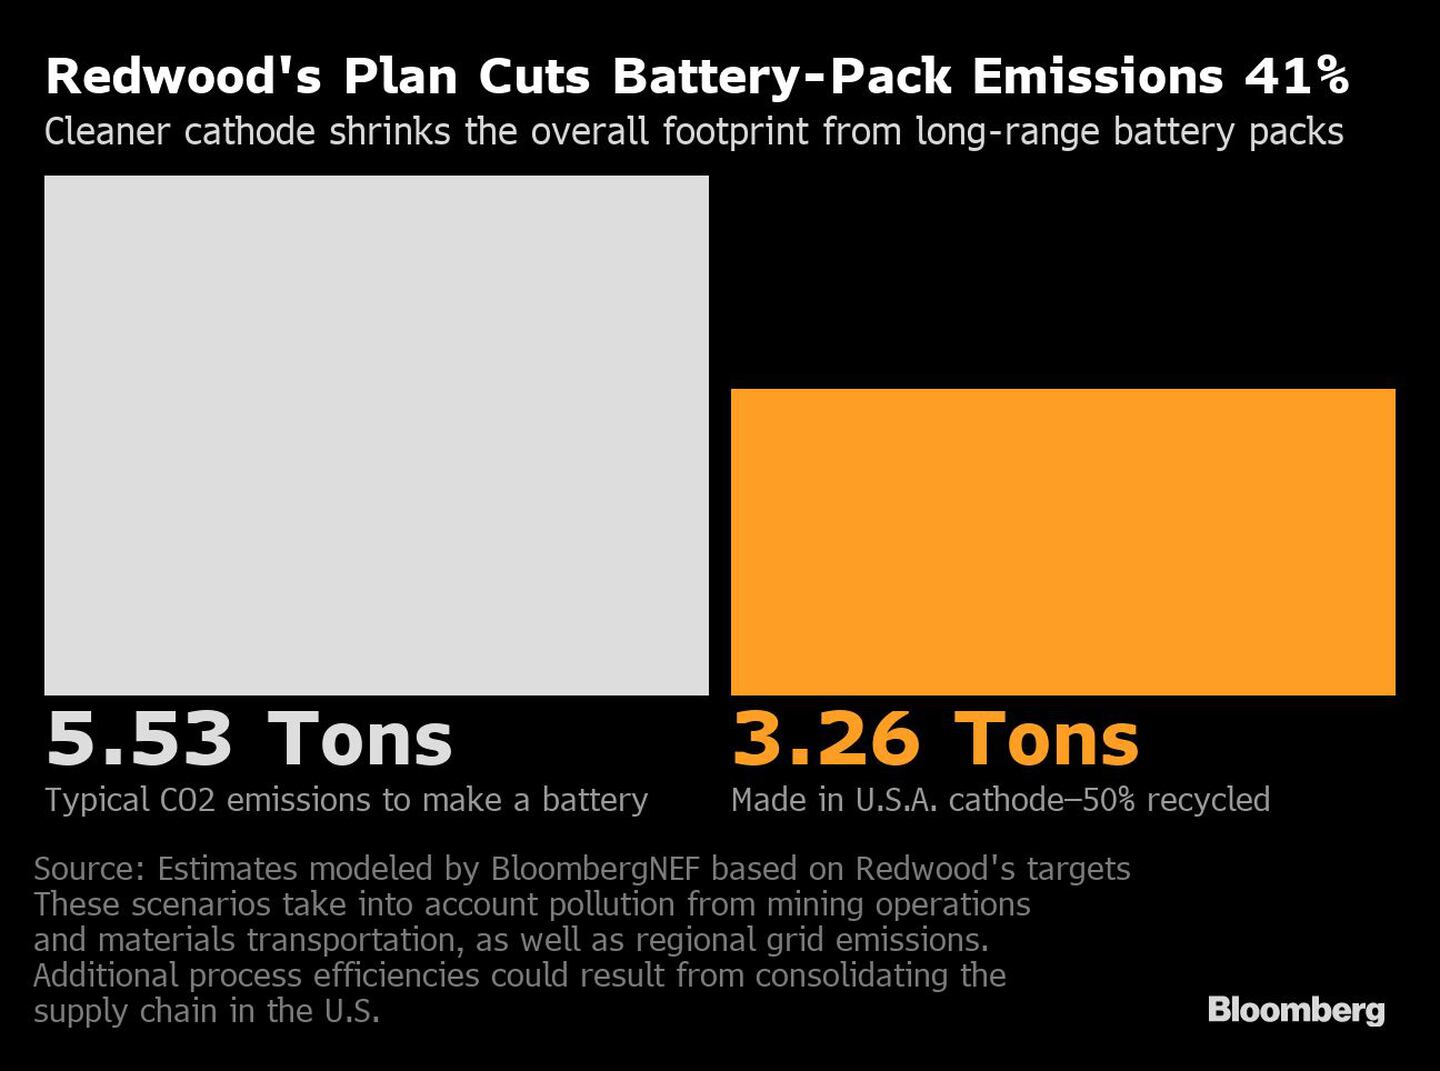 Redwood's Plan Cuts Battery-Pack Emissions 41%dfd